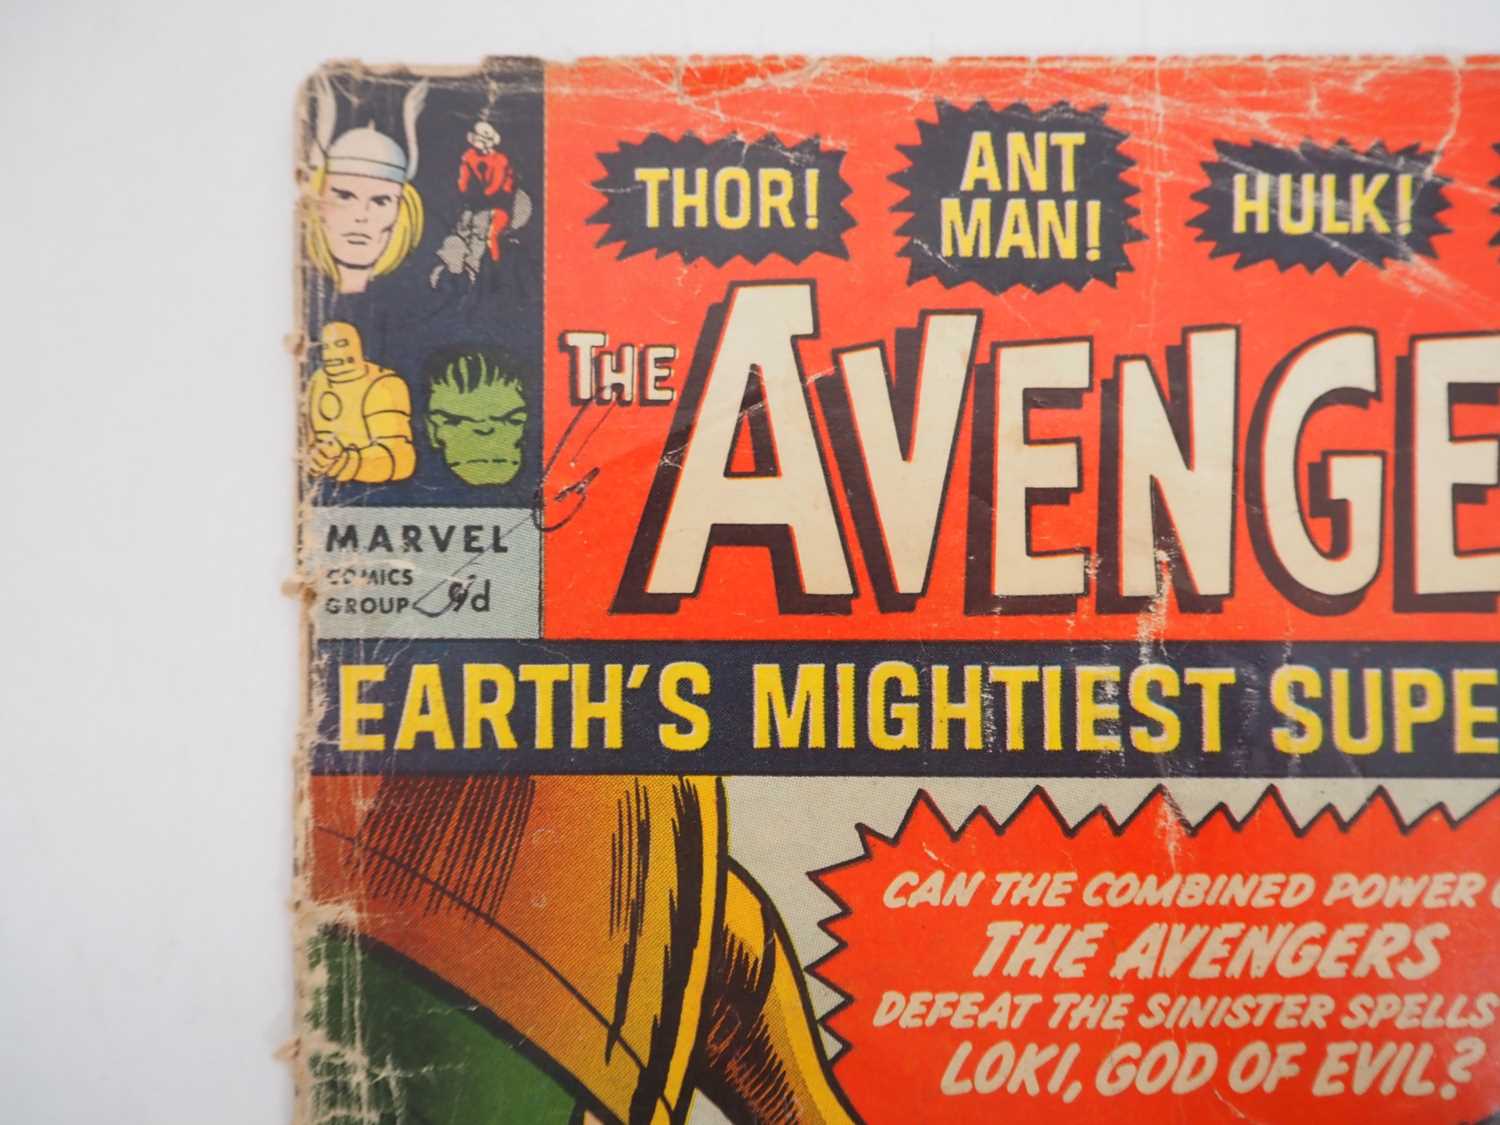 AVENGERS #1 - (1963 - MARVEL - UK Price Variant) - KEY Comic Book - First appearance of the Avengers - Image 2 of 29